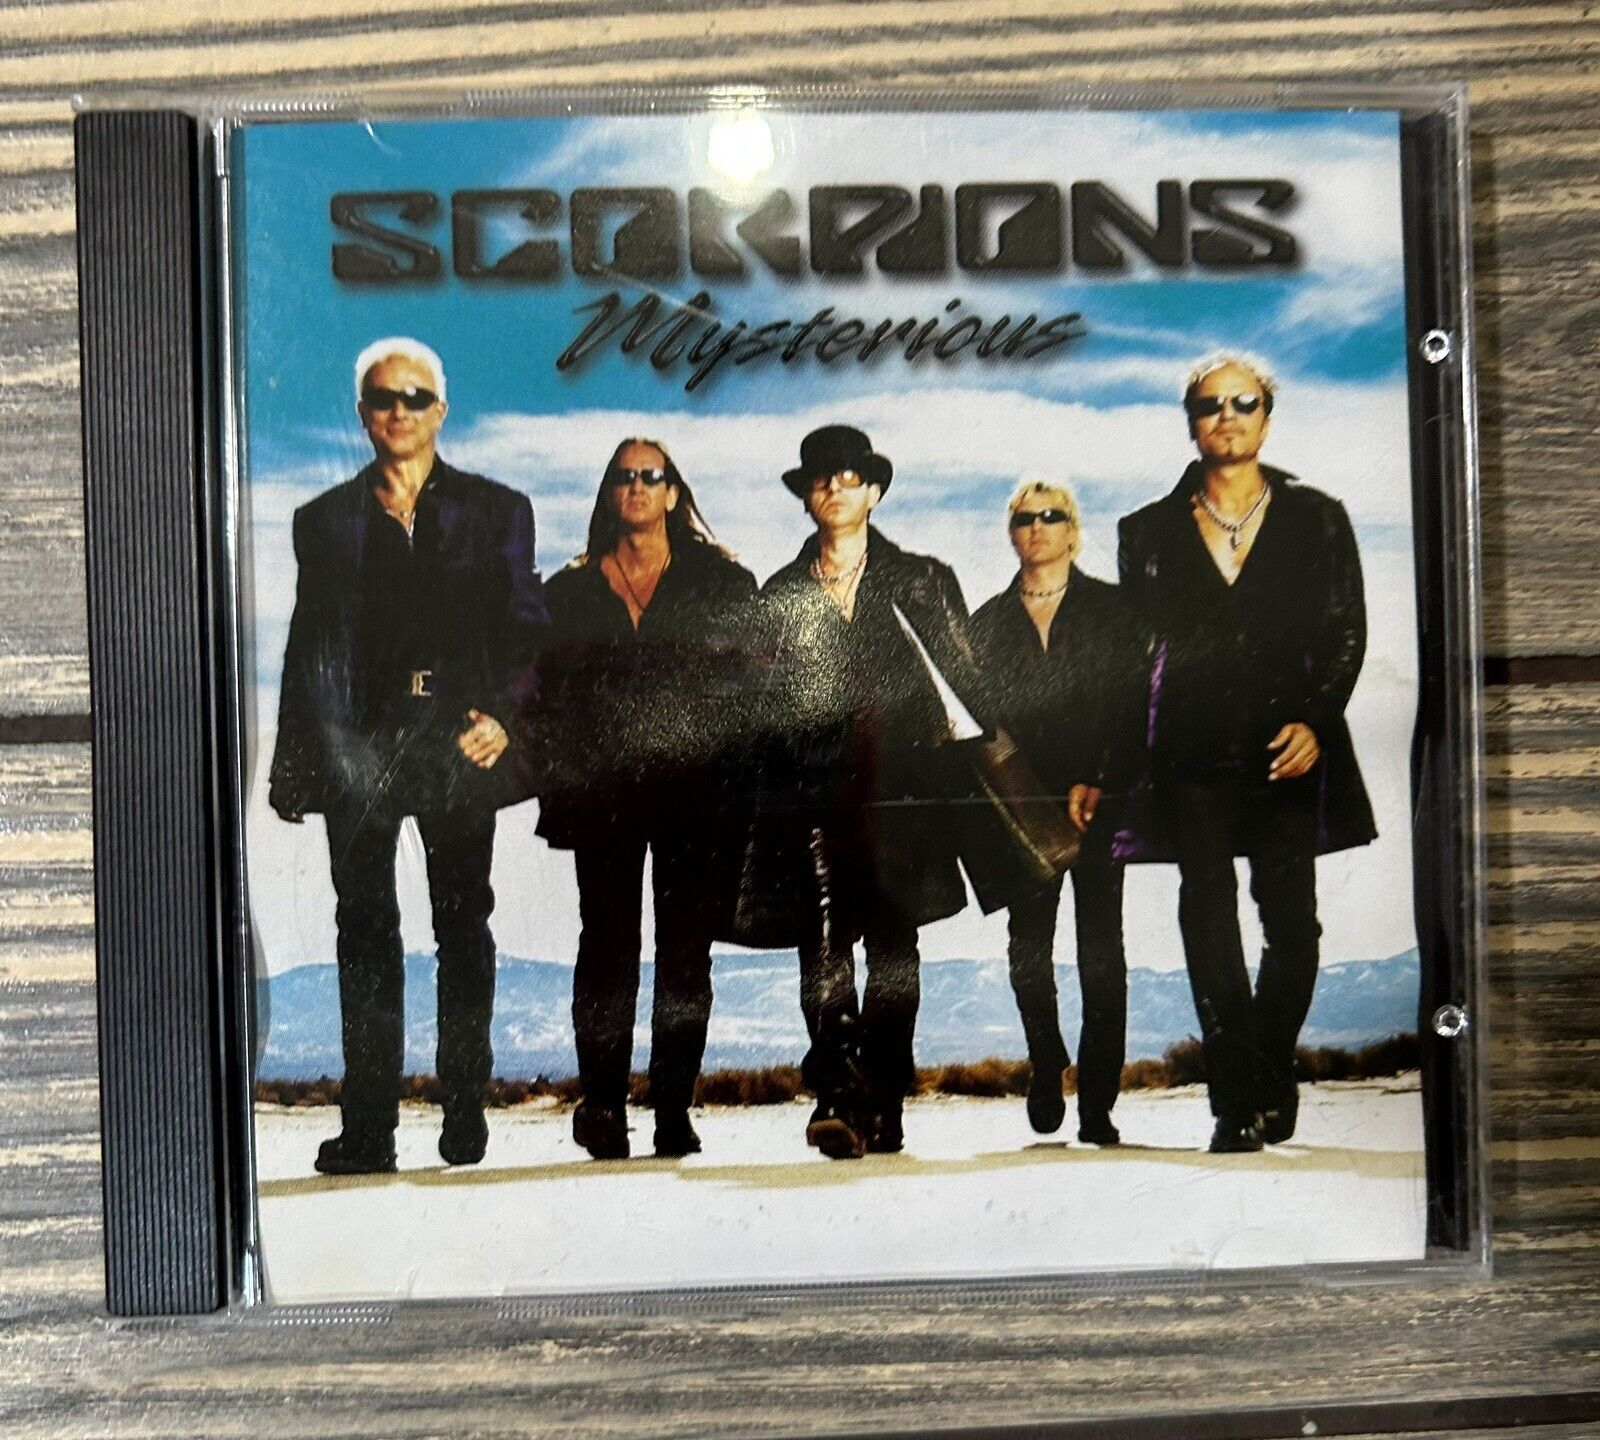 Vintage 1999 Scorpions Mysterious CD Promo Promotional Koch Records